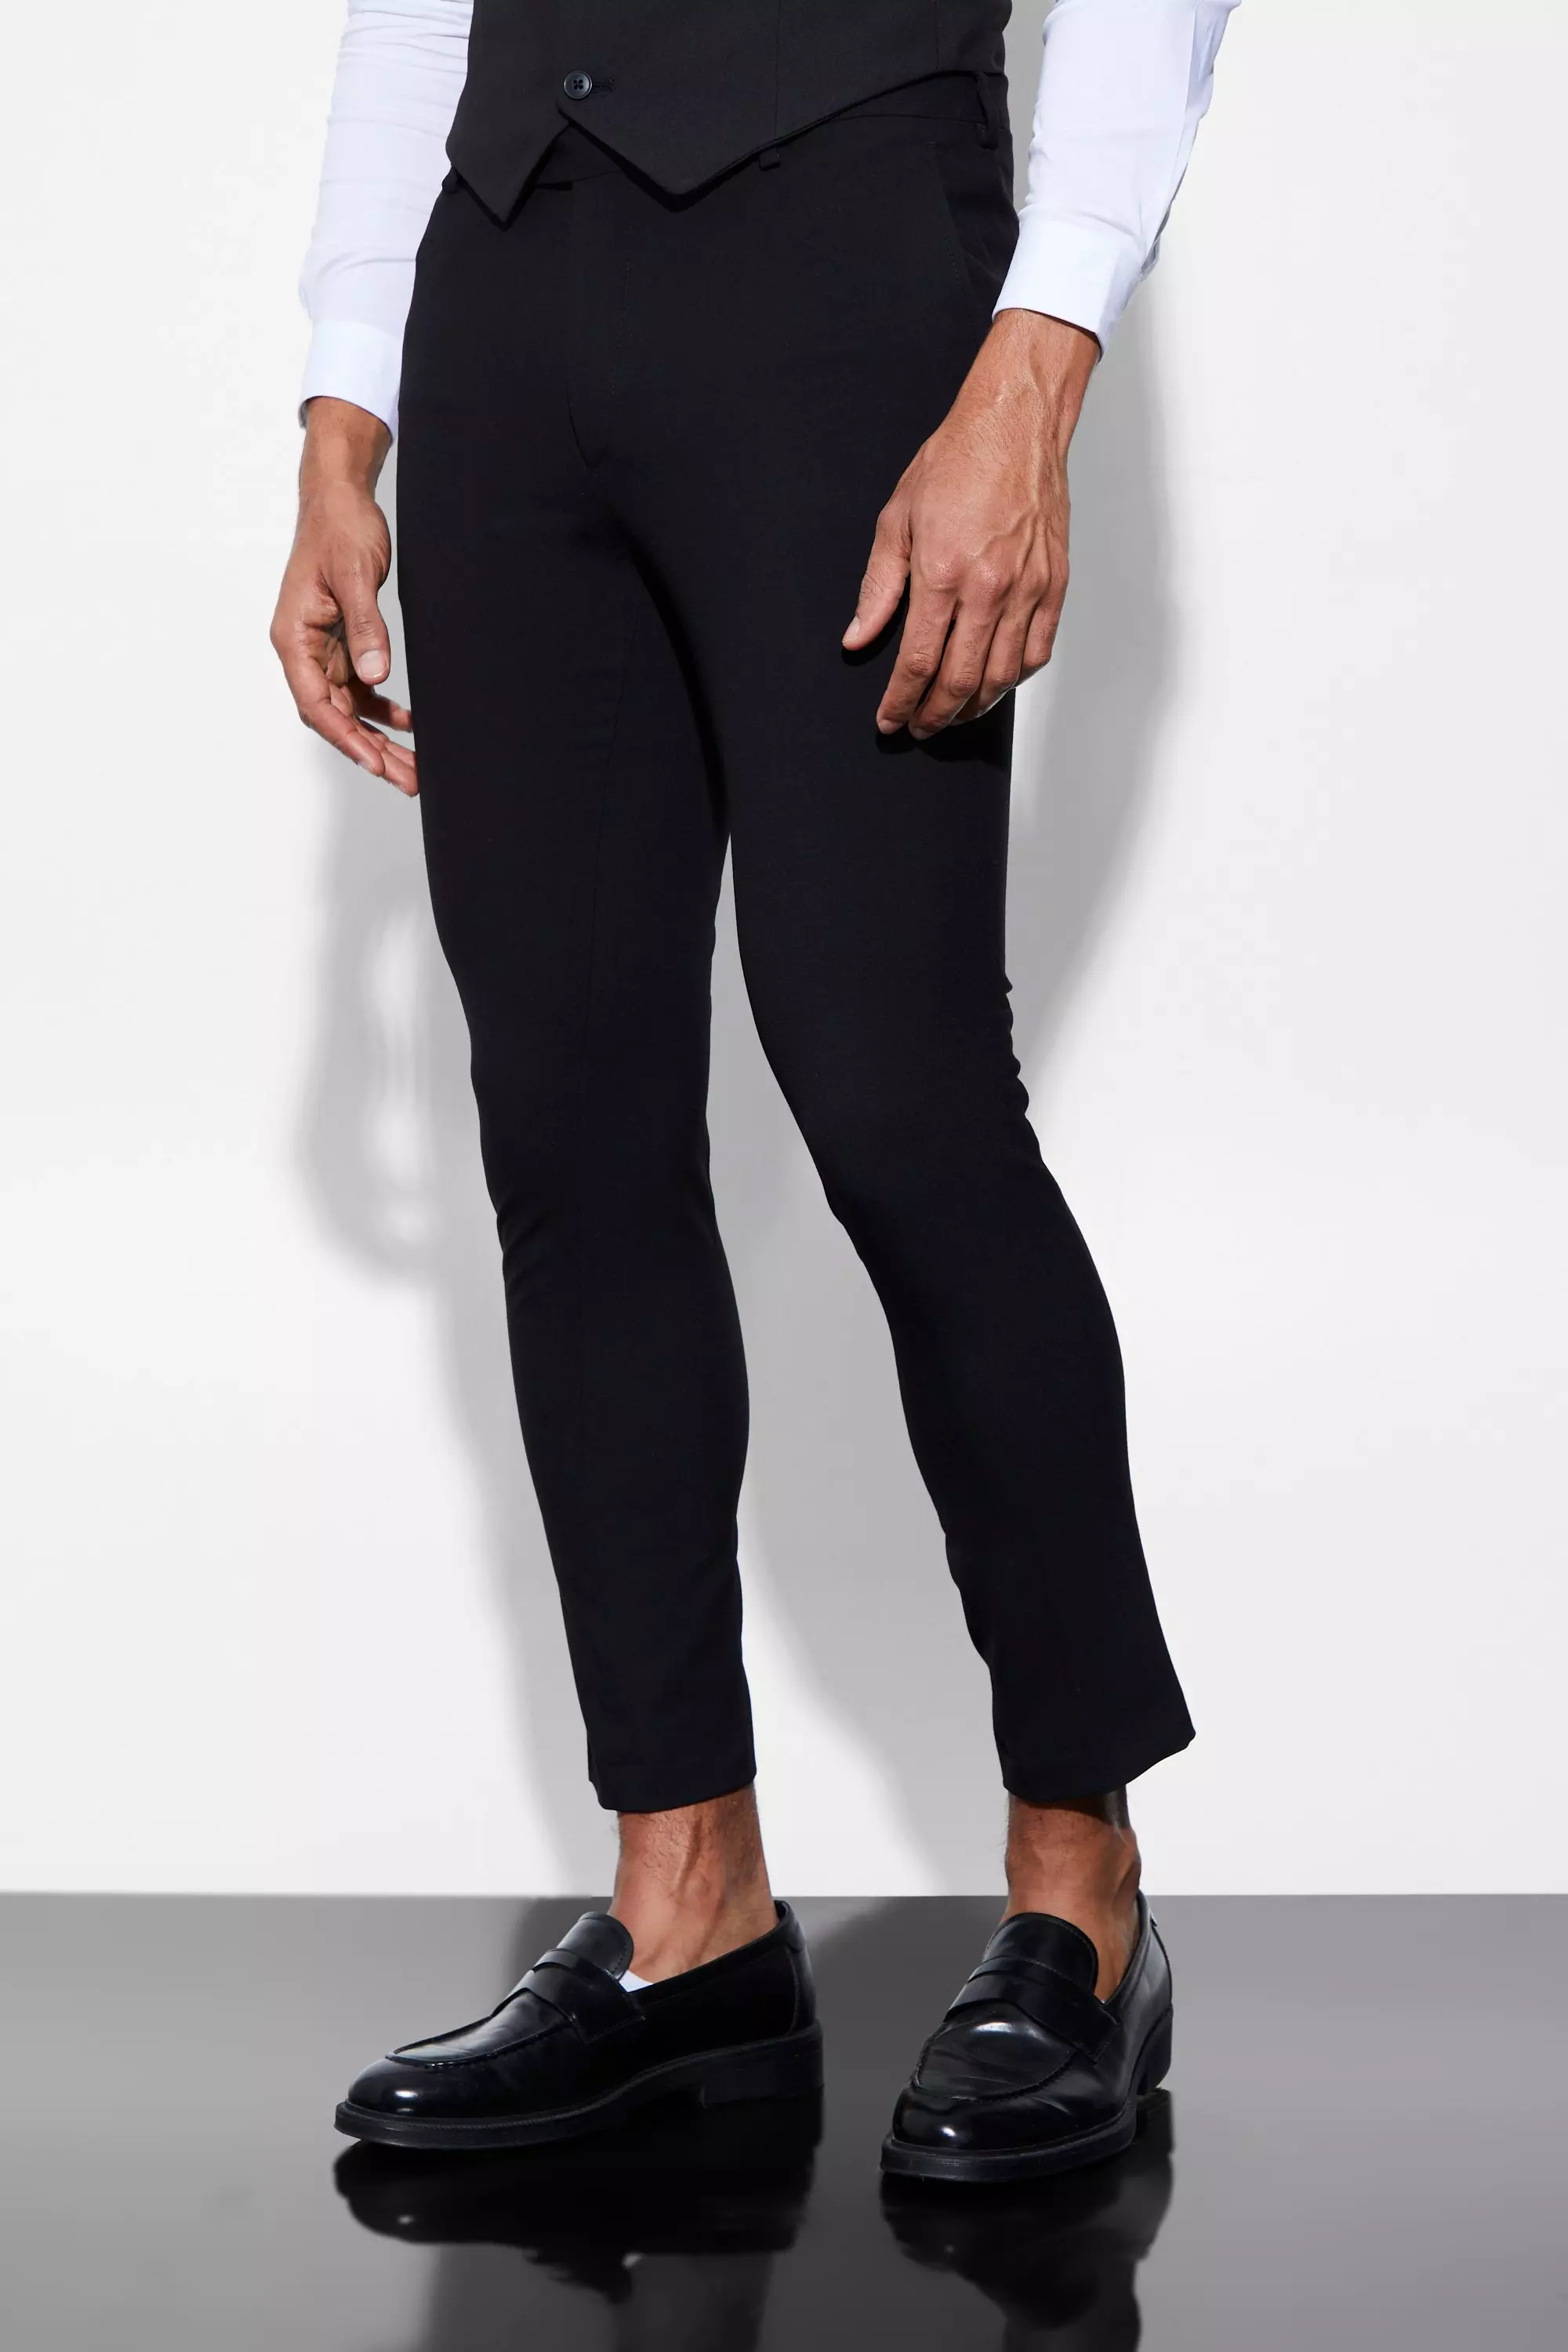 Black suit pants • Compare & find best prices today »